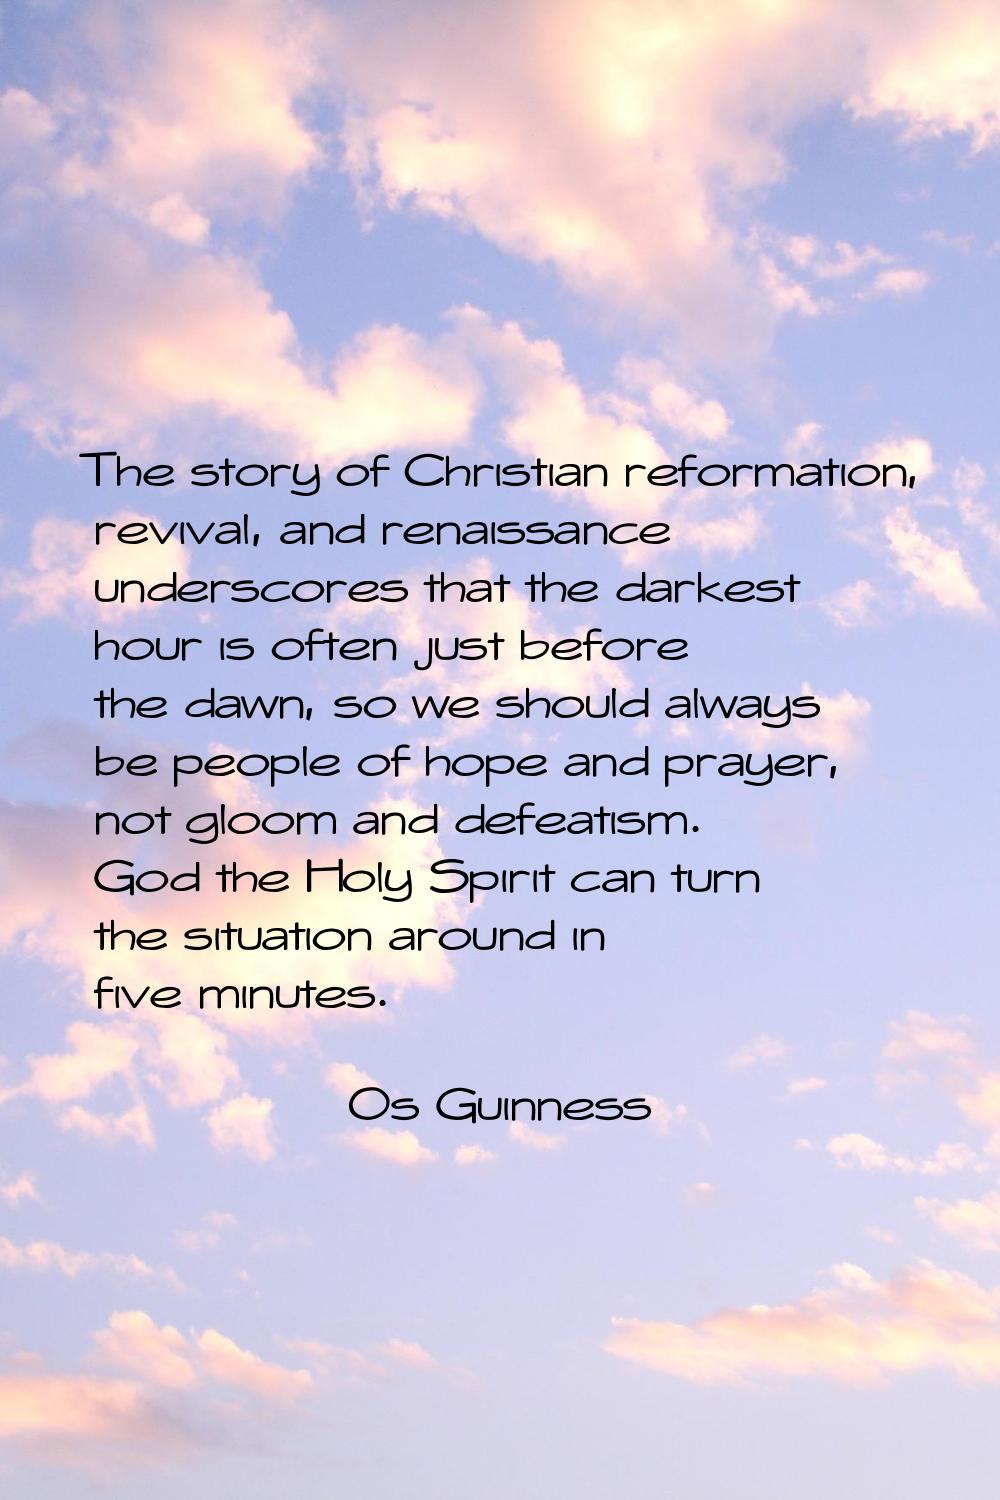 The story of Christian reformation, revival, and renaissance underscores that the darkest hour is o